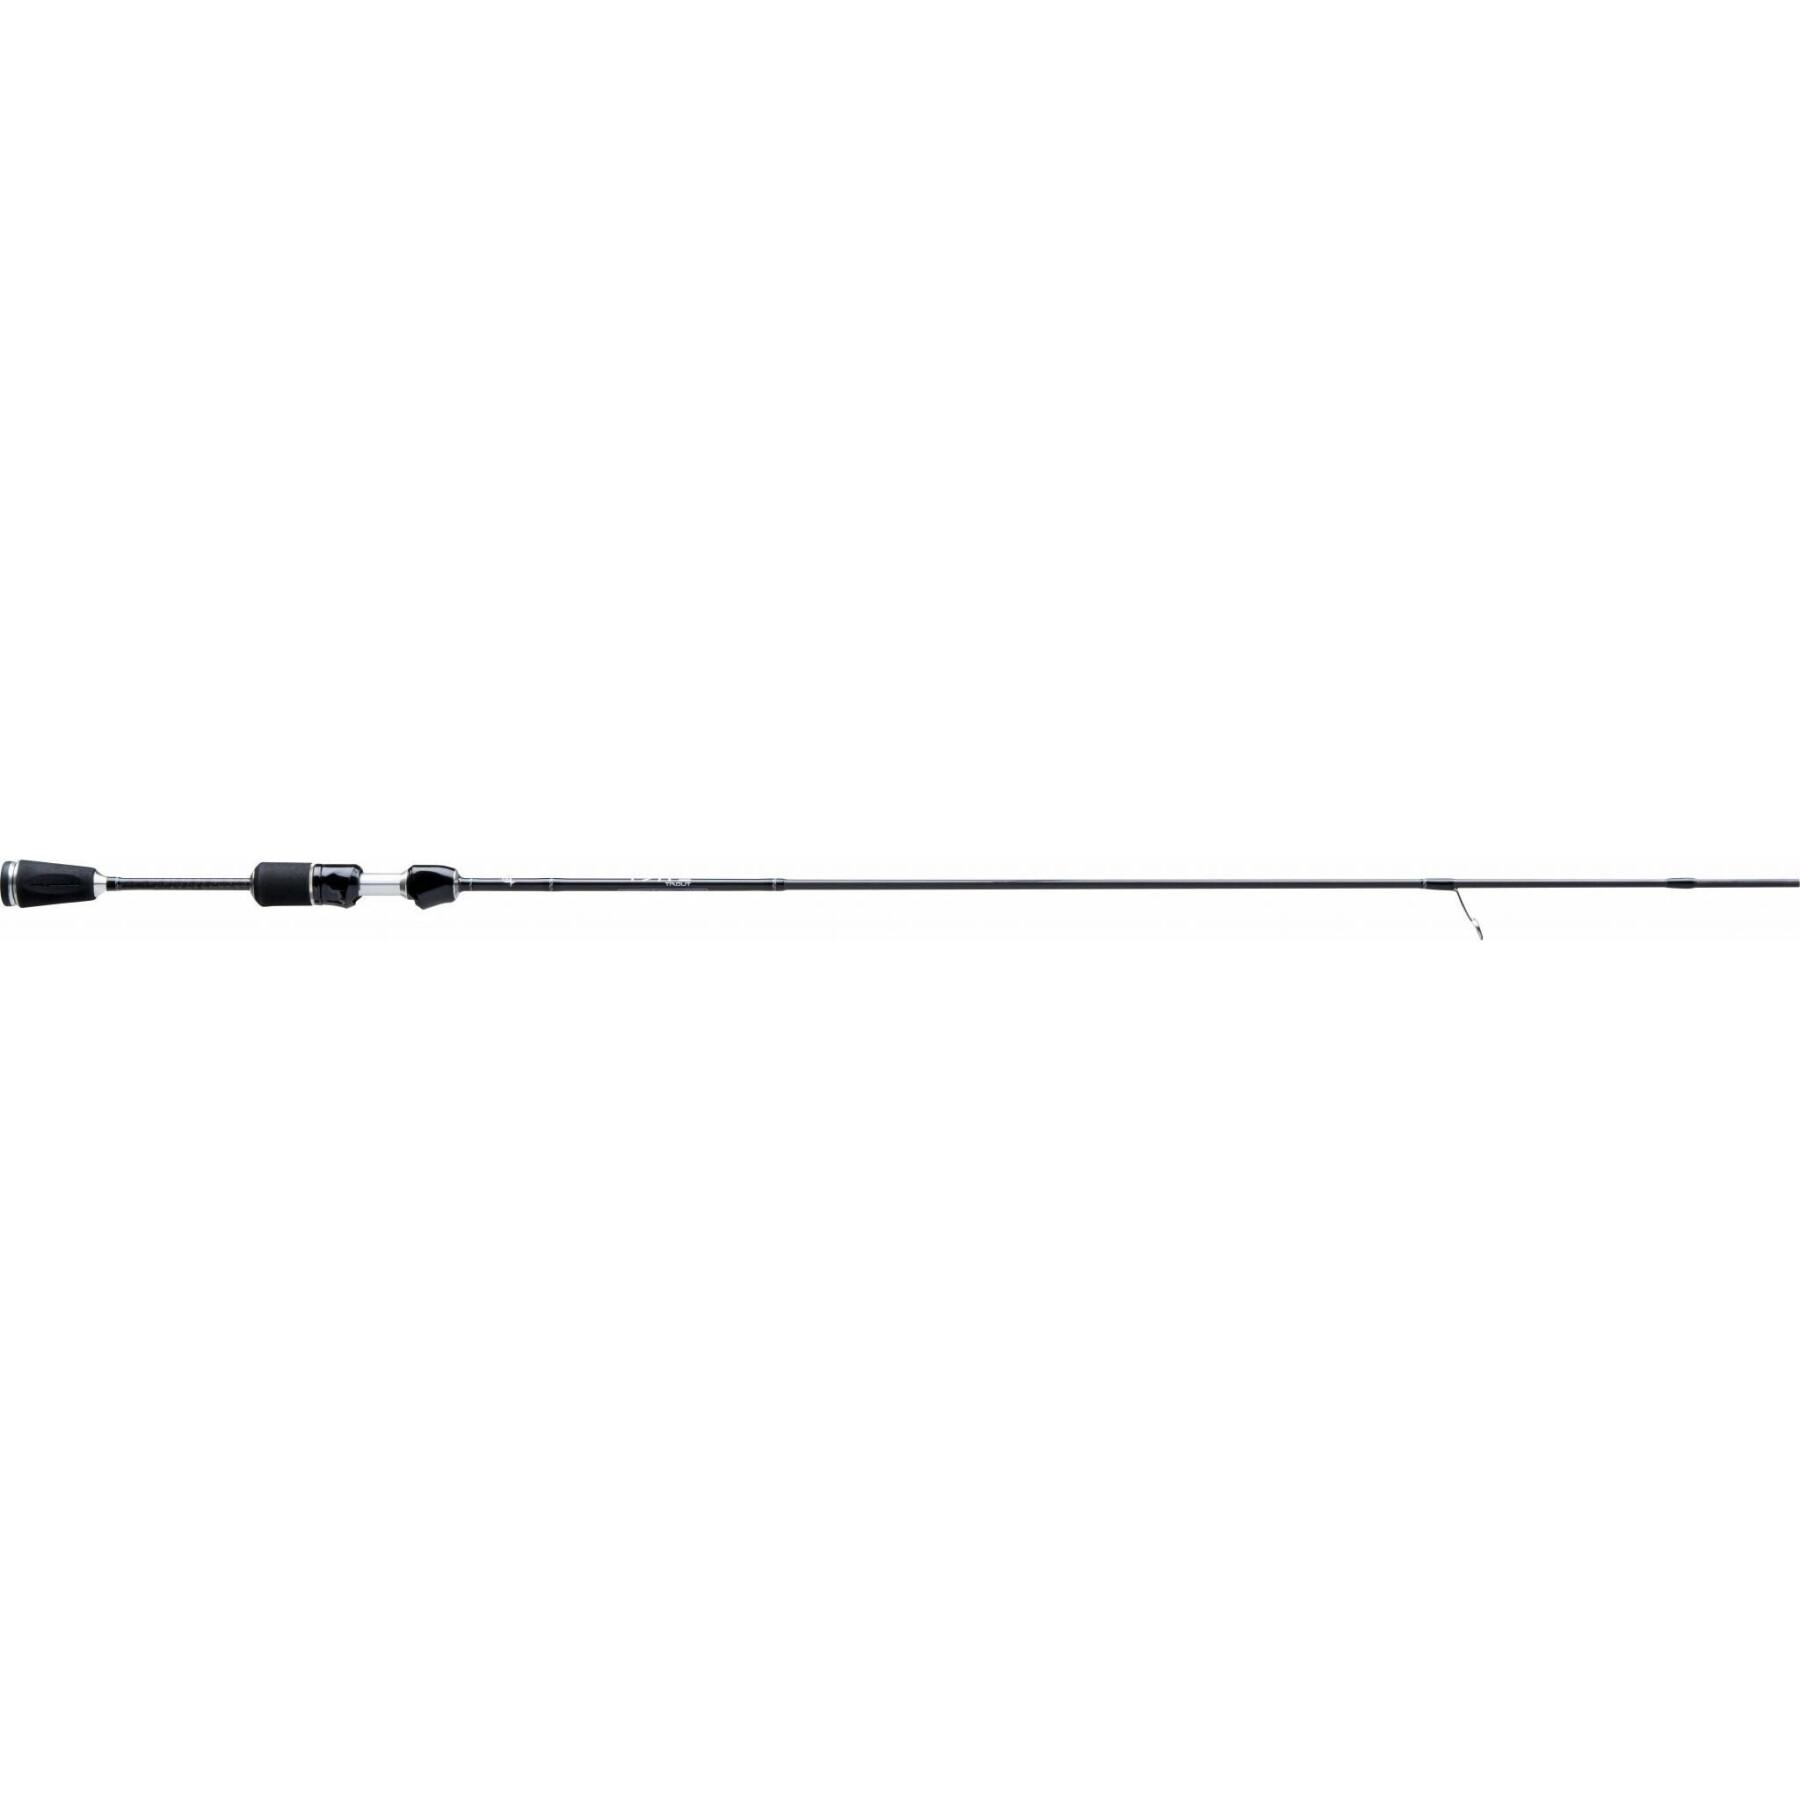 Angelrute 13 Fishing Fate Trout sp 2m 1-4g